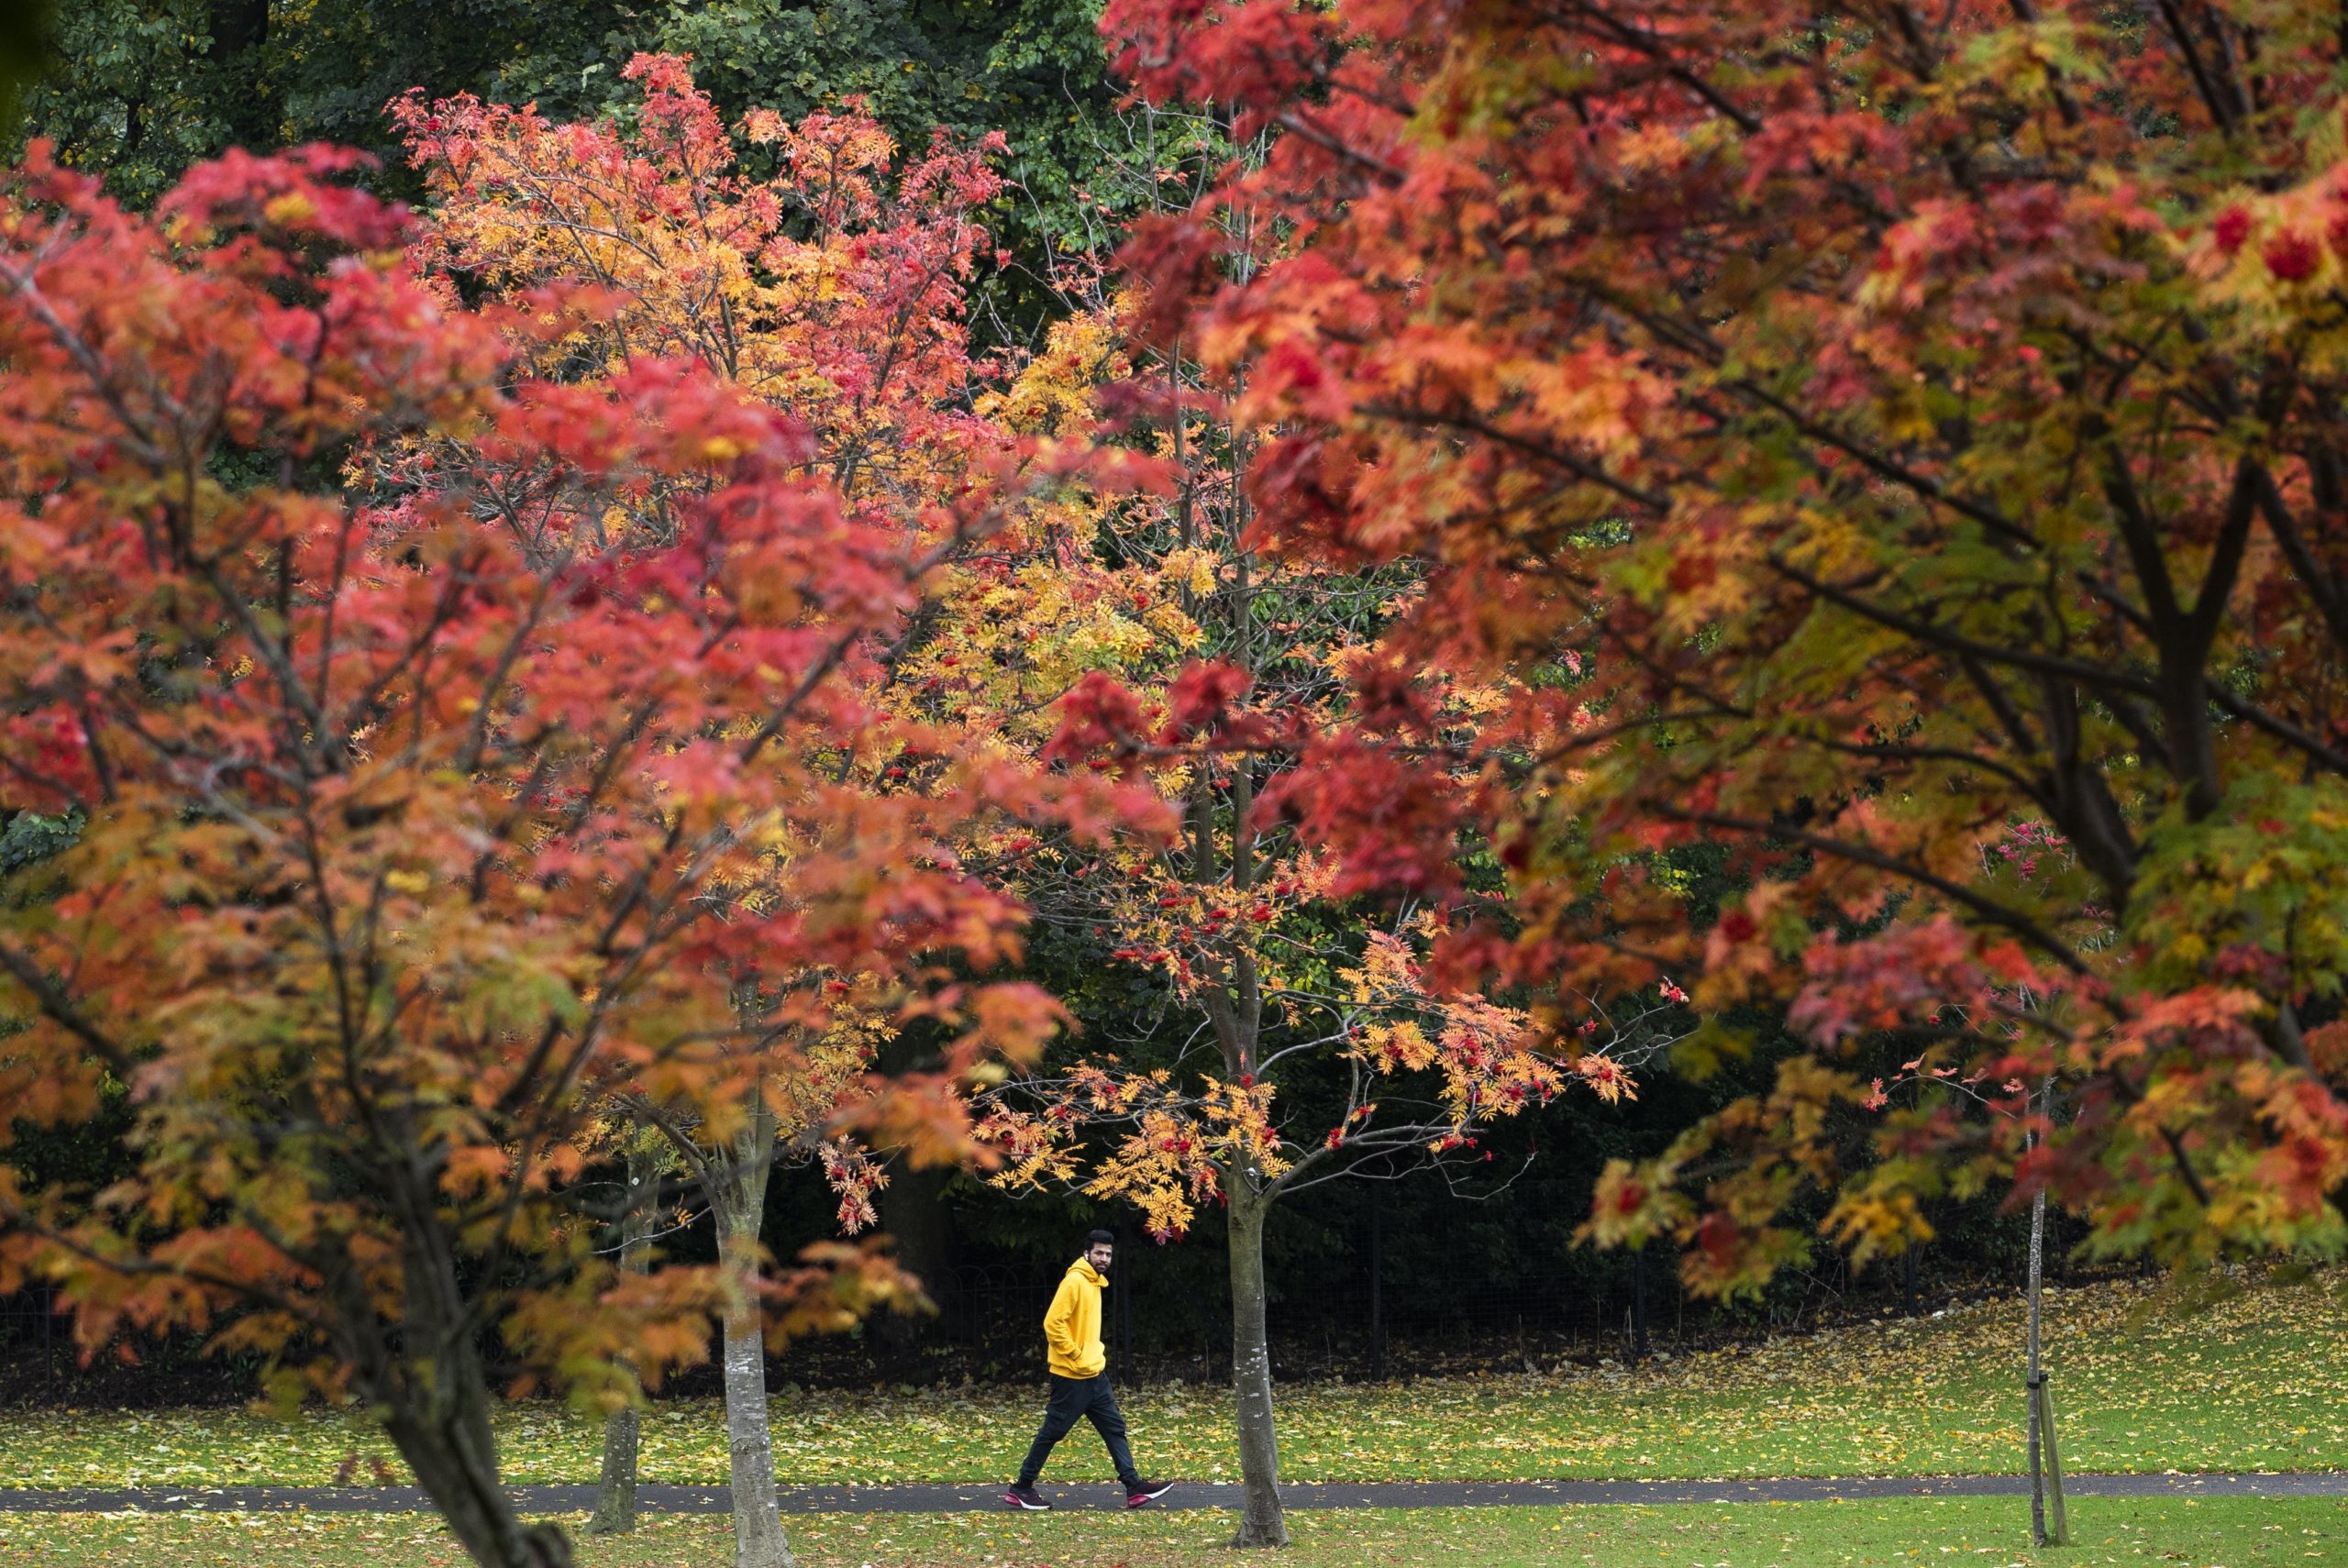 National Trust predicts good year for autumn colour